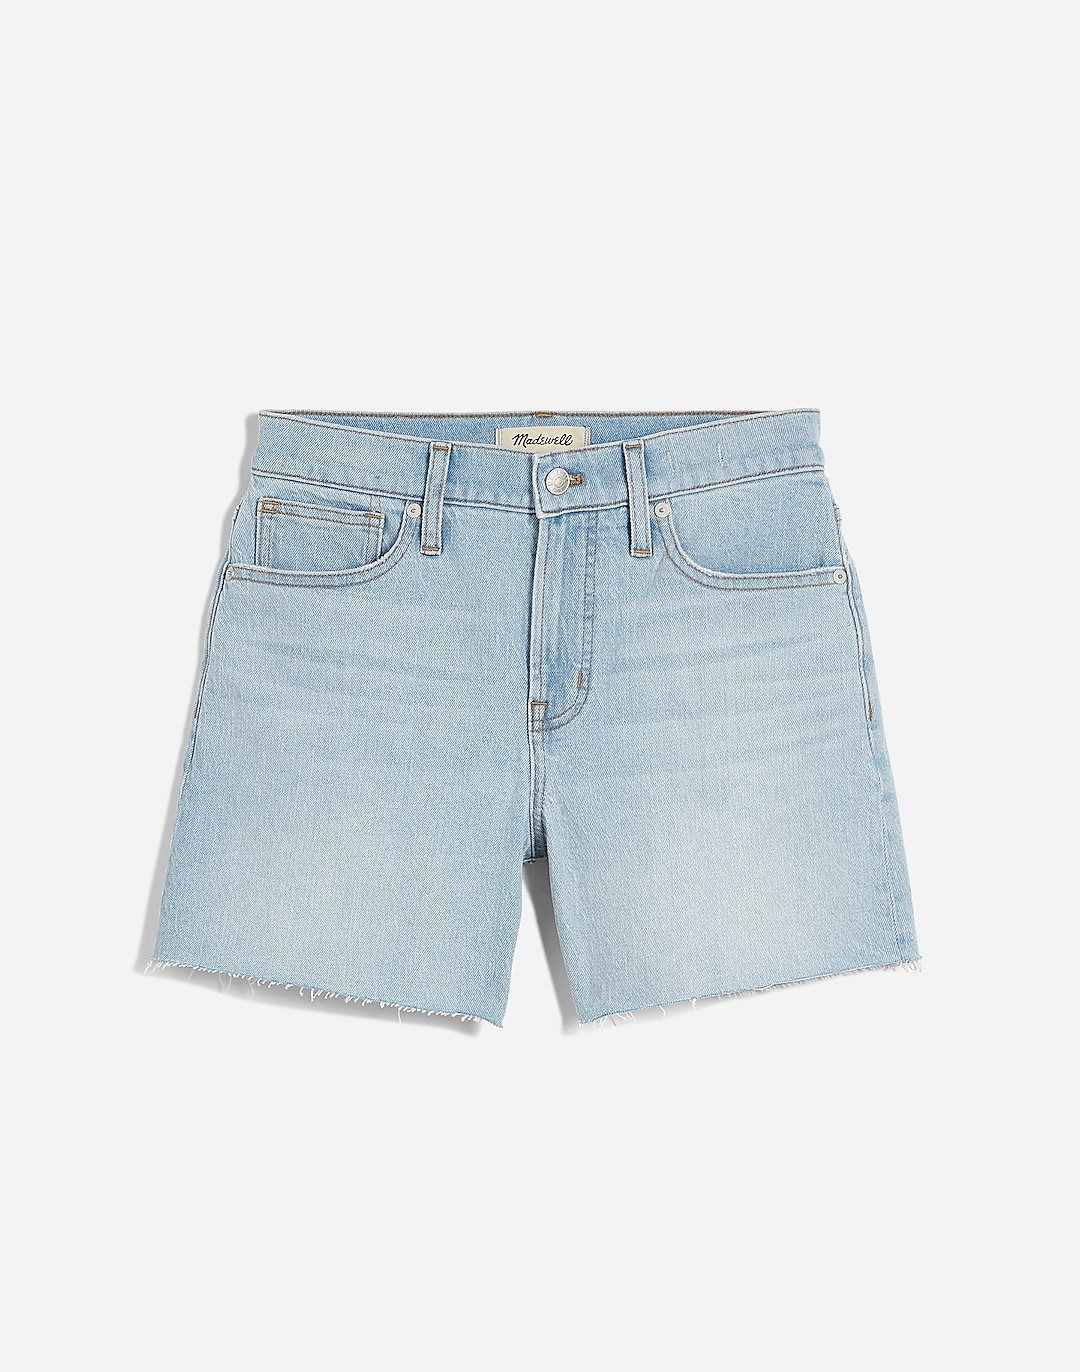 The Perfect Vintage Jean Short in Fitzgerald Wash: Raw-Hem Edition | Madewell